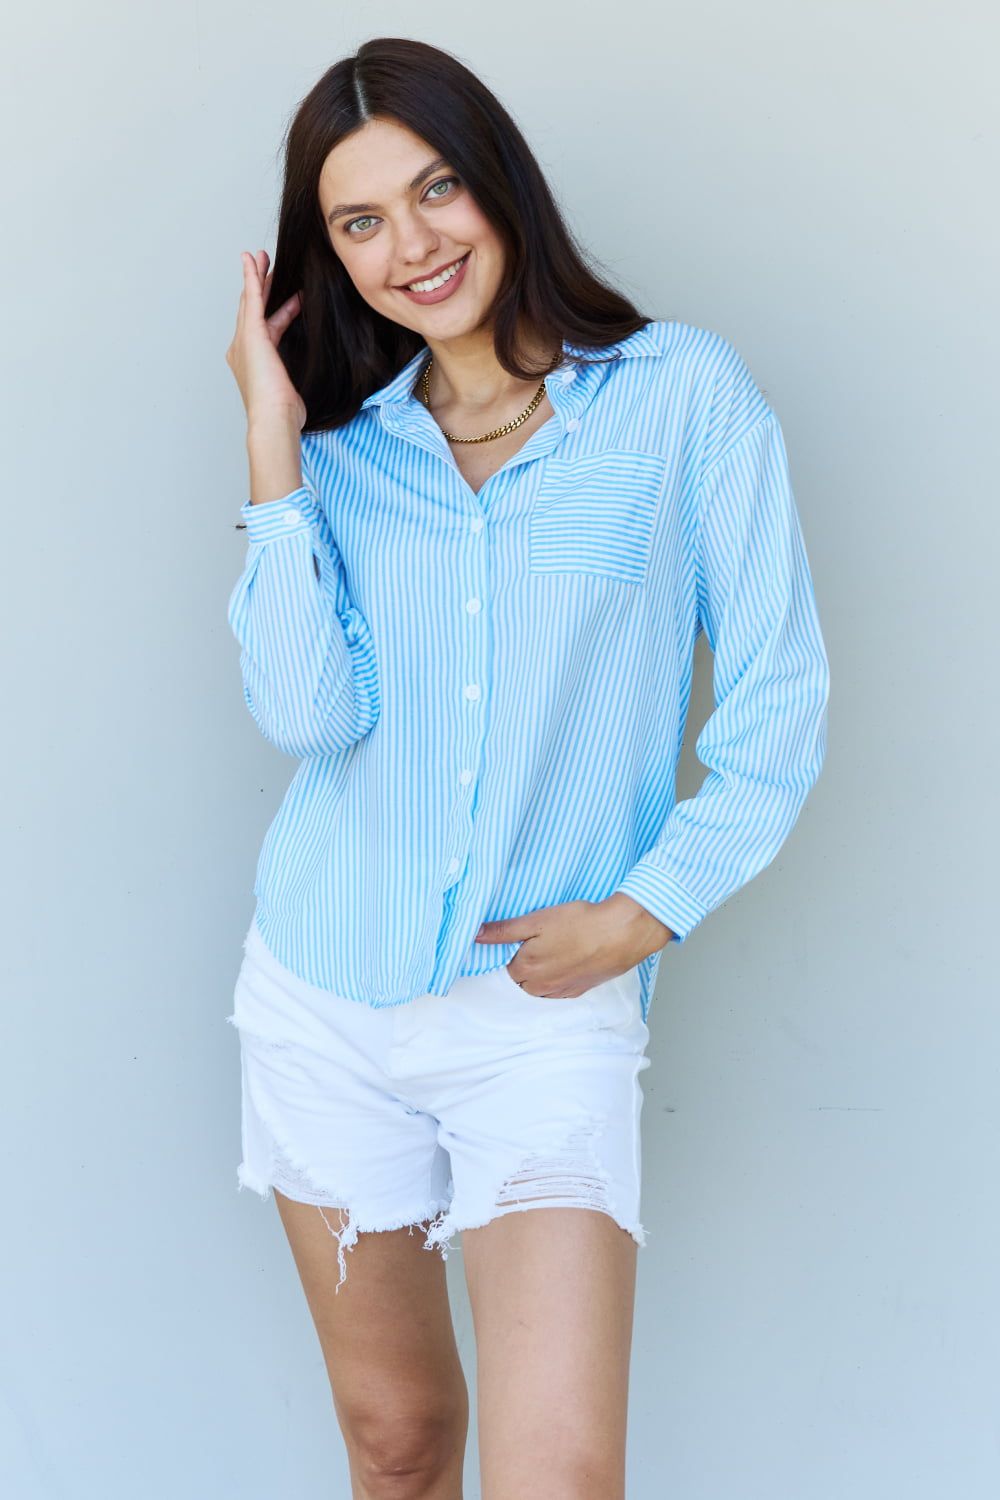 Doublju She Means Business Striped Button Down Shirt Top - By Baano